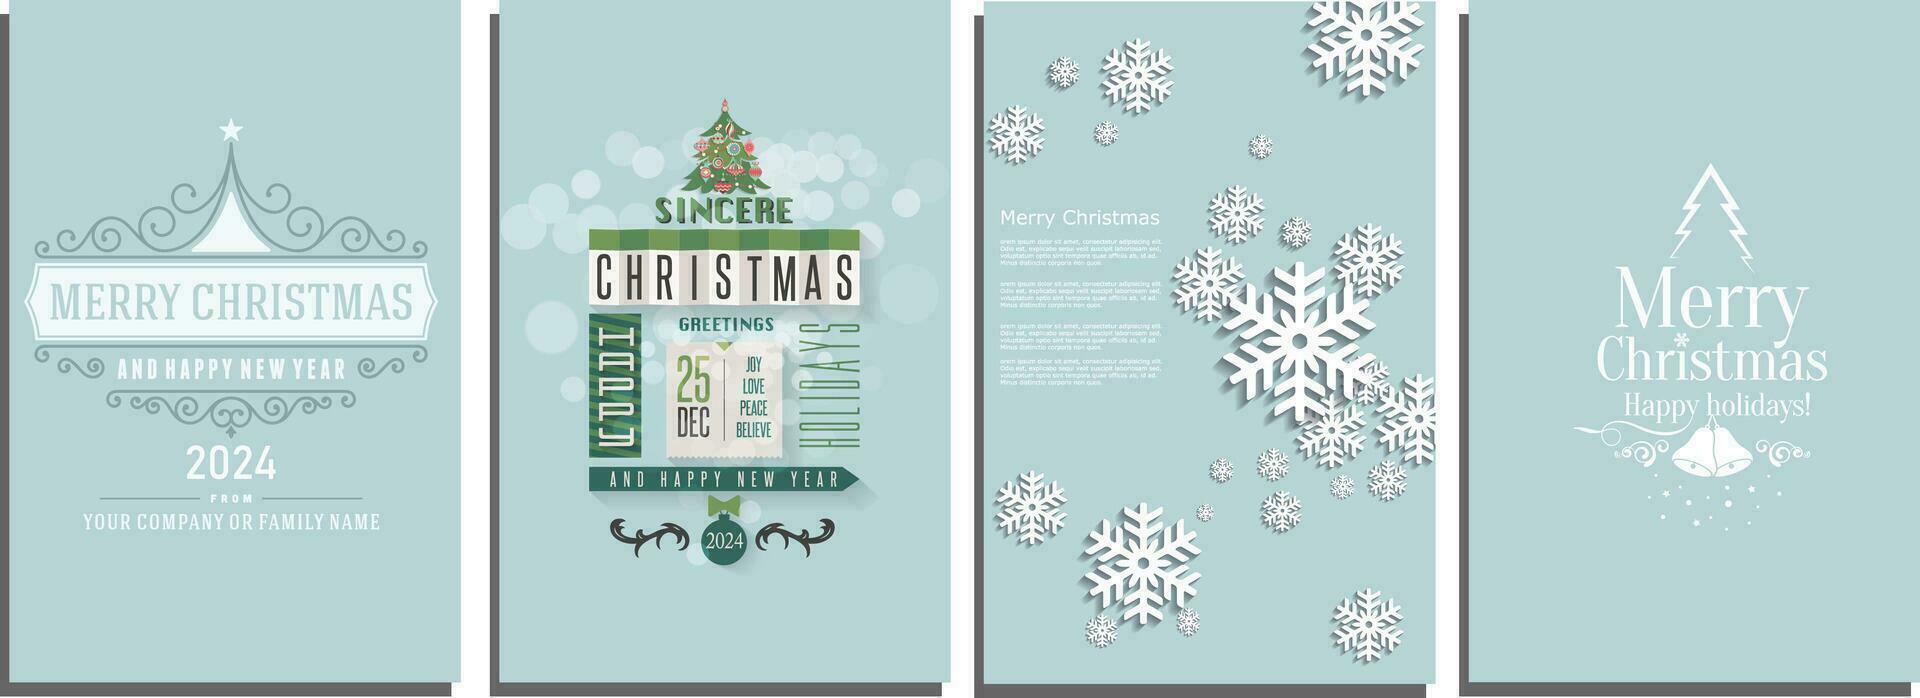 Christmas modern design set in paper cut style with Christmas tree, snowflakes, various gifts. Christmas card, poster, holiday cover or banner vector